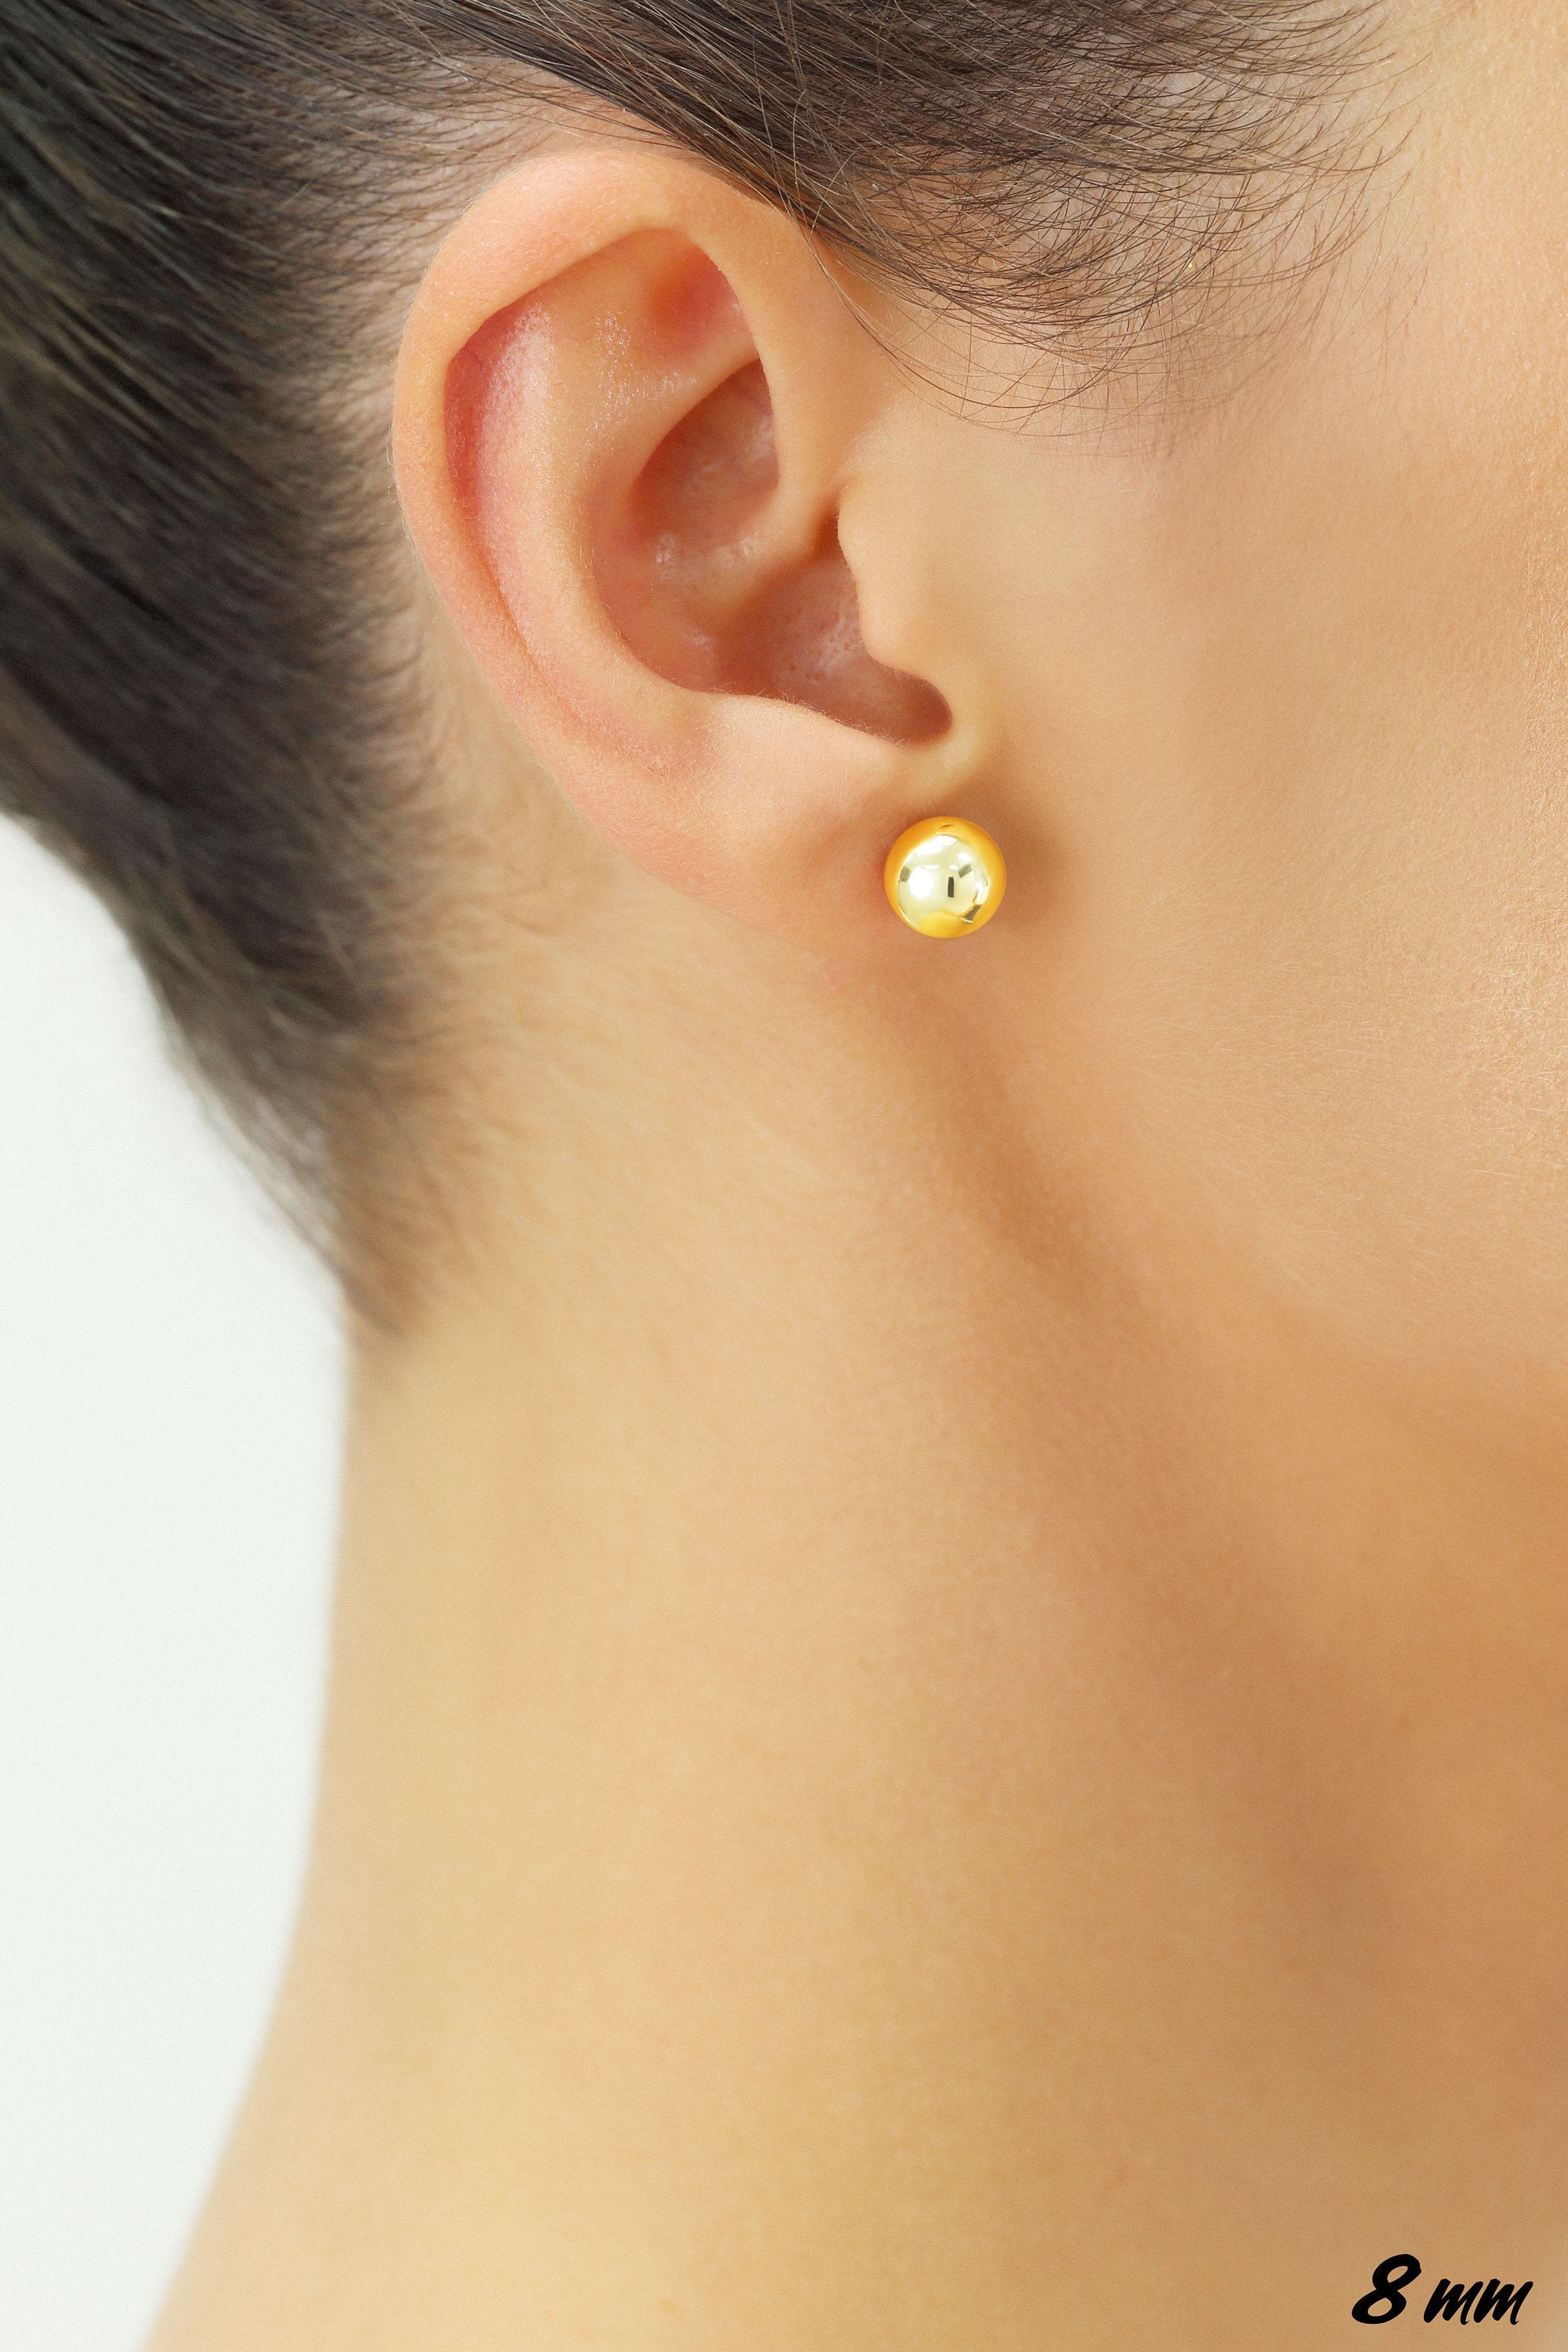 14K Yellow Gold Ball Stud Earrings, Silicone Covered Gold Push Backings (Unisex)